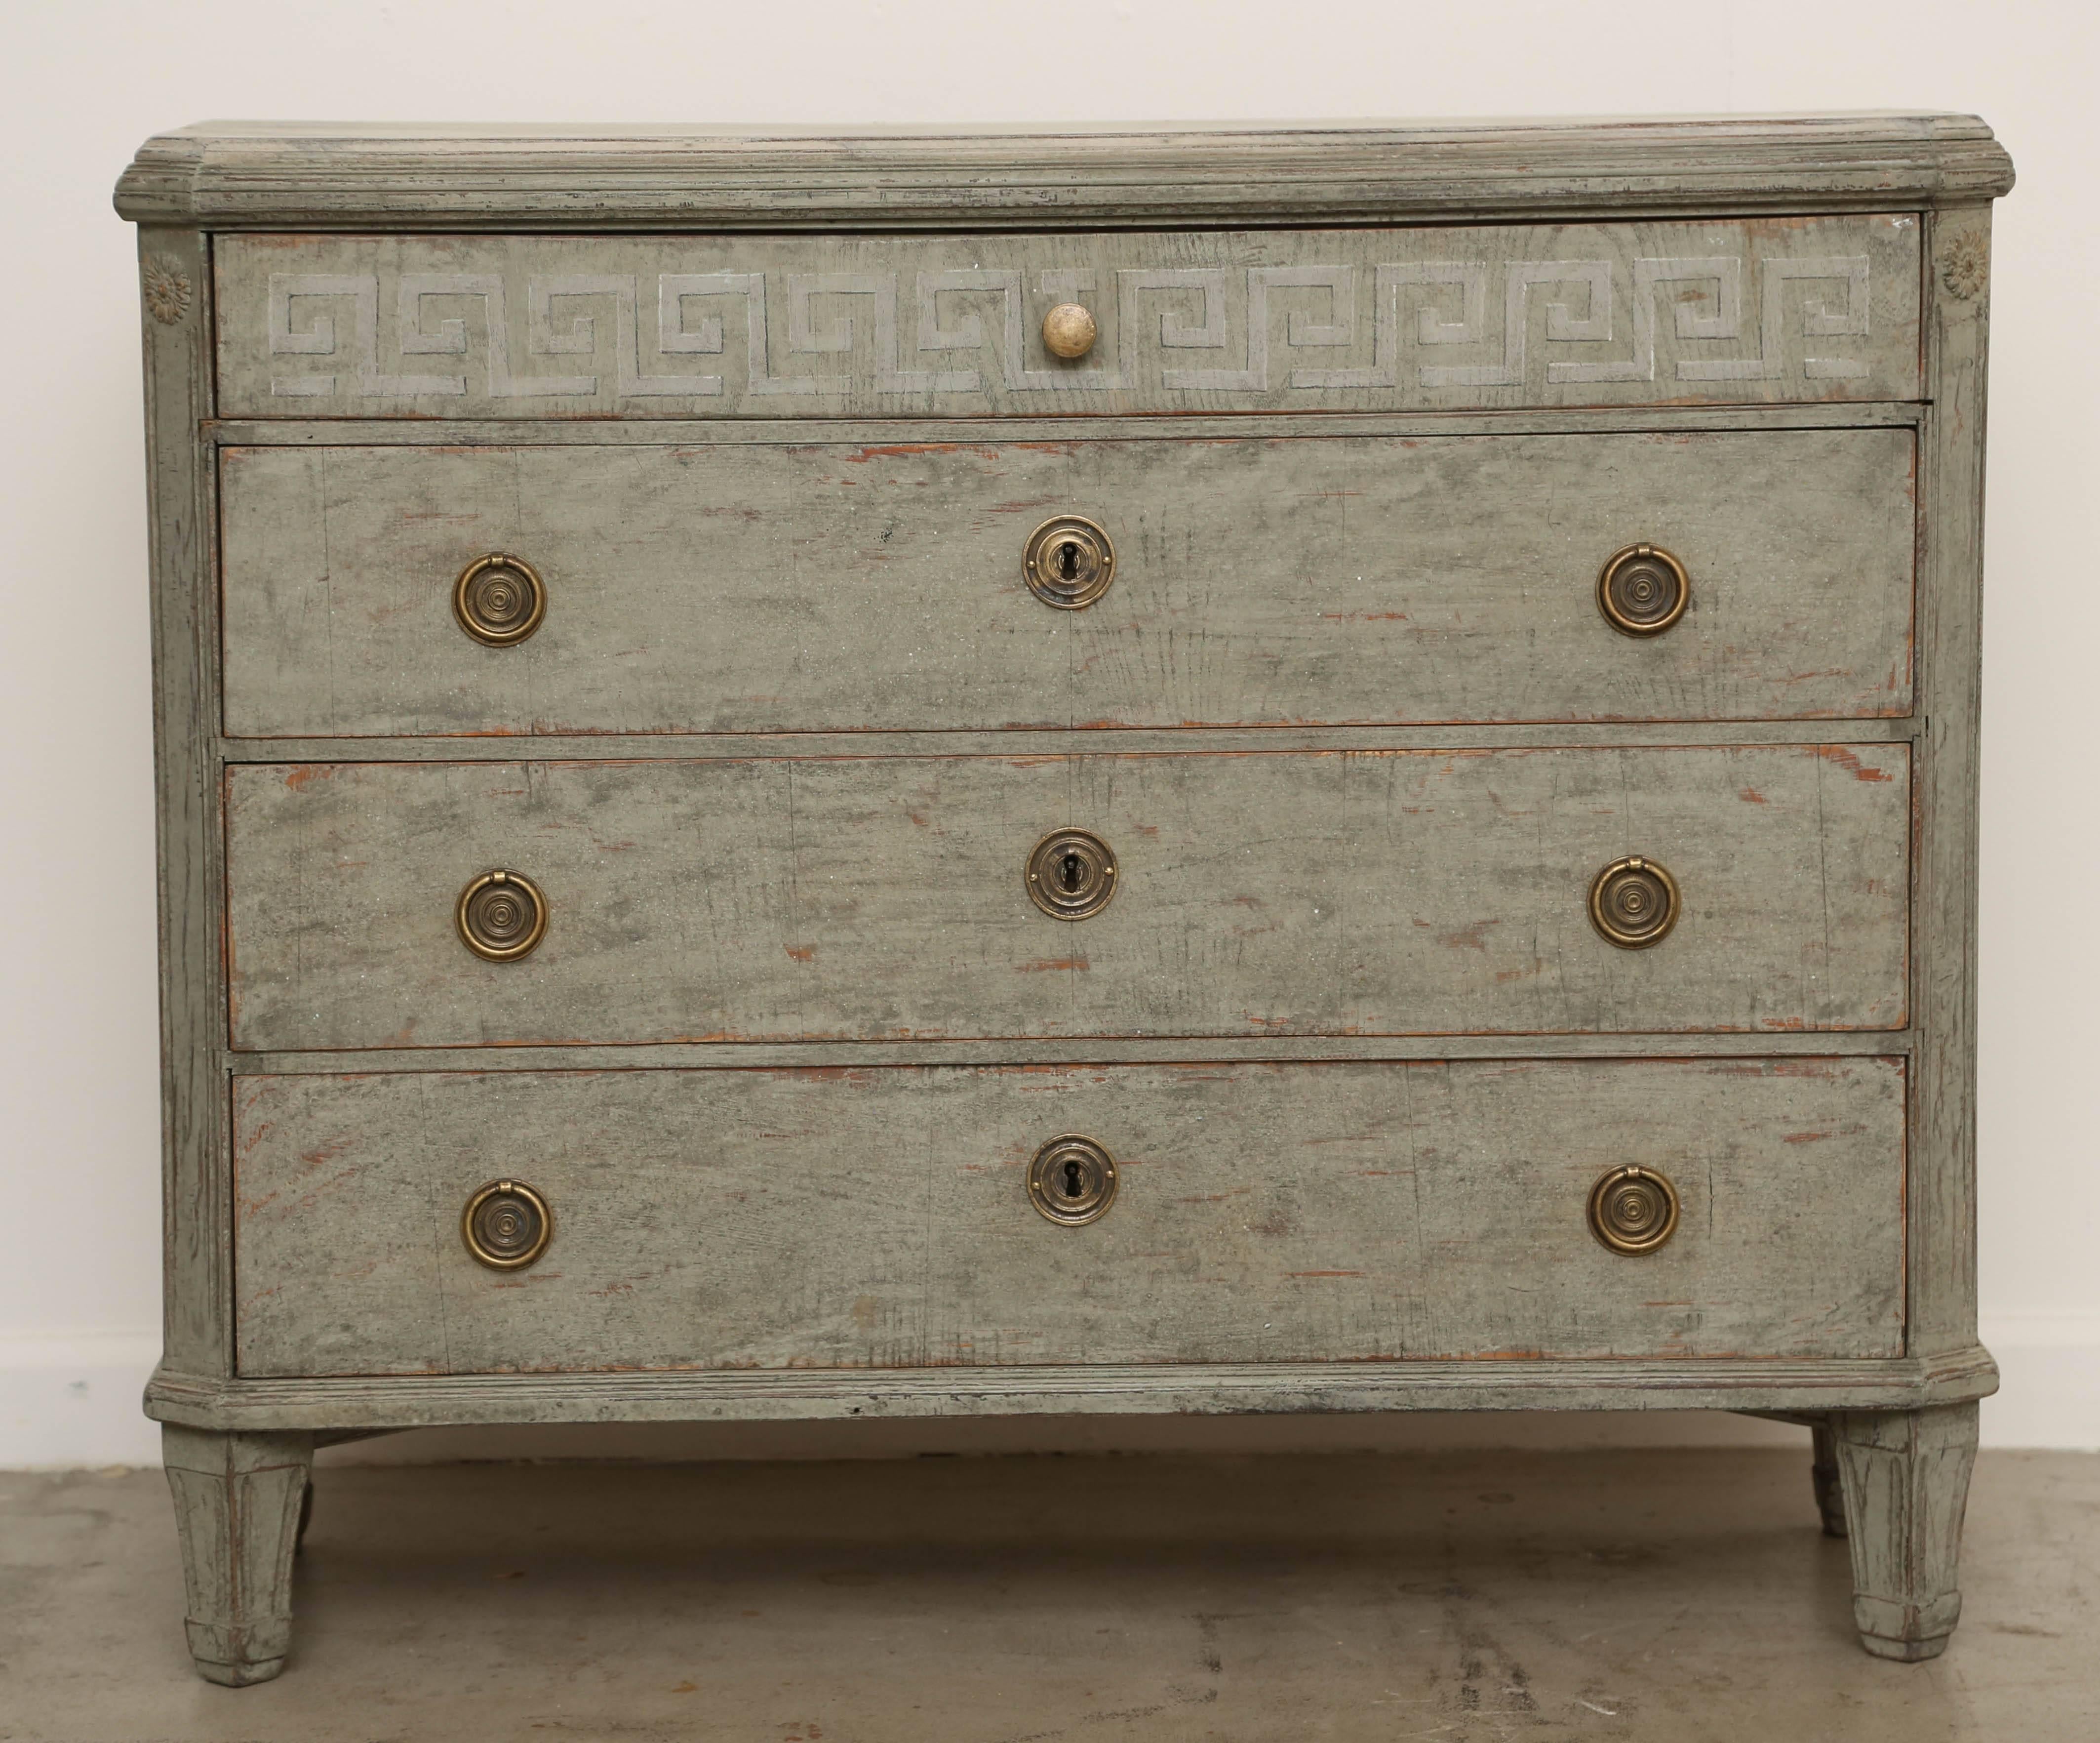 Antique Swedish Gustavian painted chest with faux finishes, early 19th century
Top is painted in faux gray-green marble finish and carved border,
four drawers, the top drawer has elegant Greek Key faux painted design and brass pull ,three lower